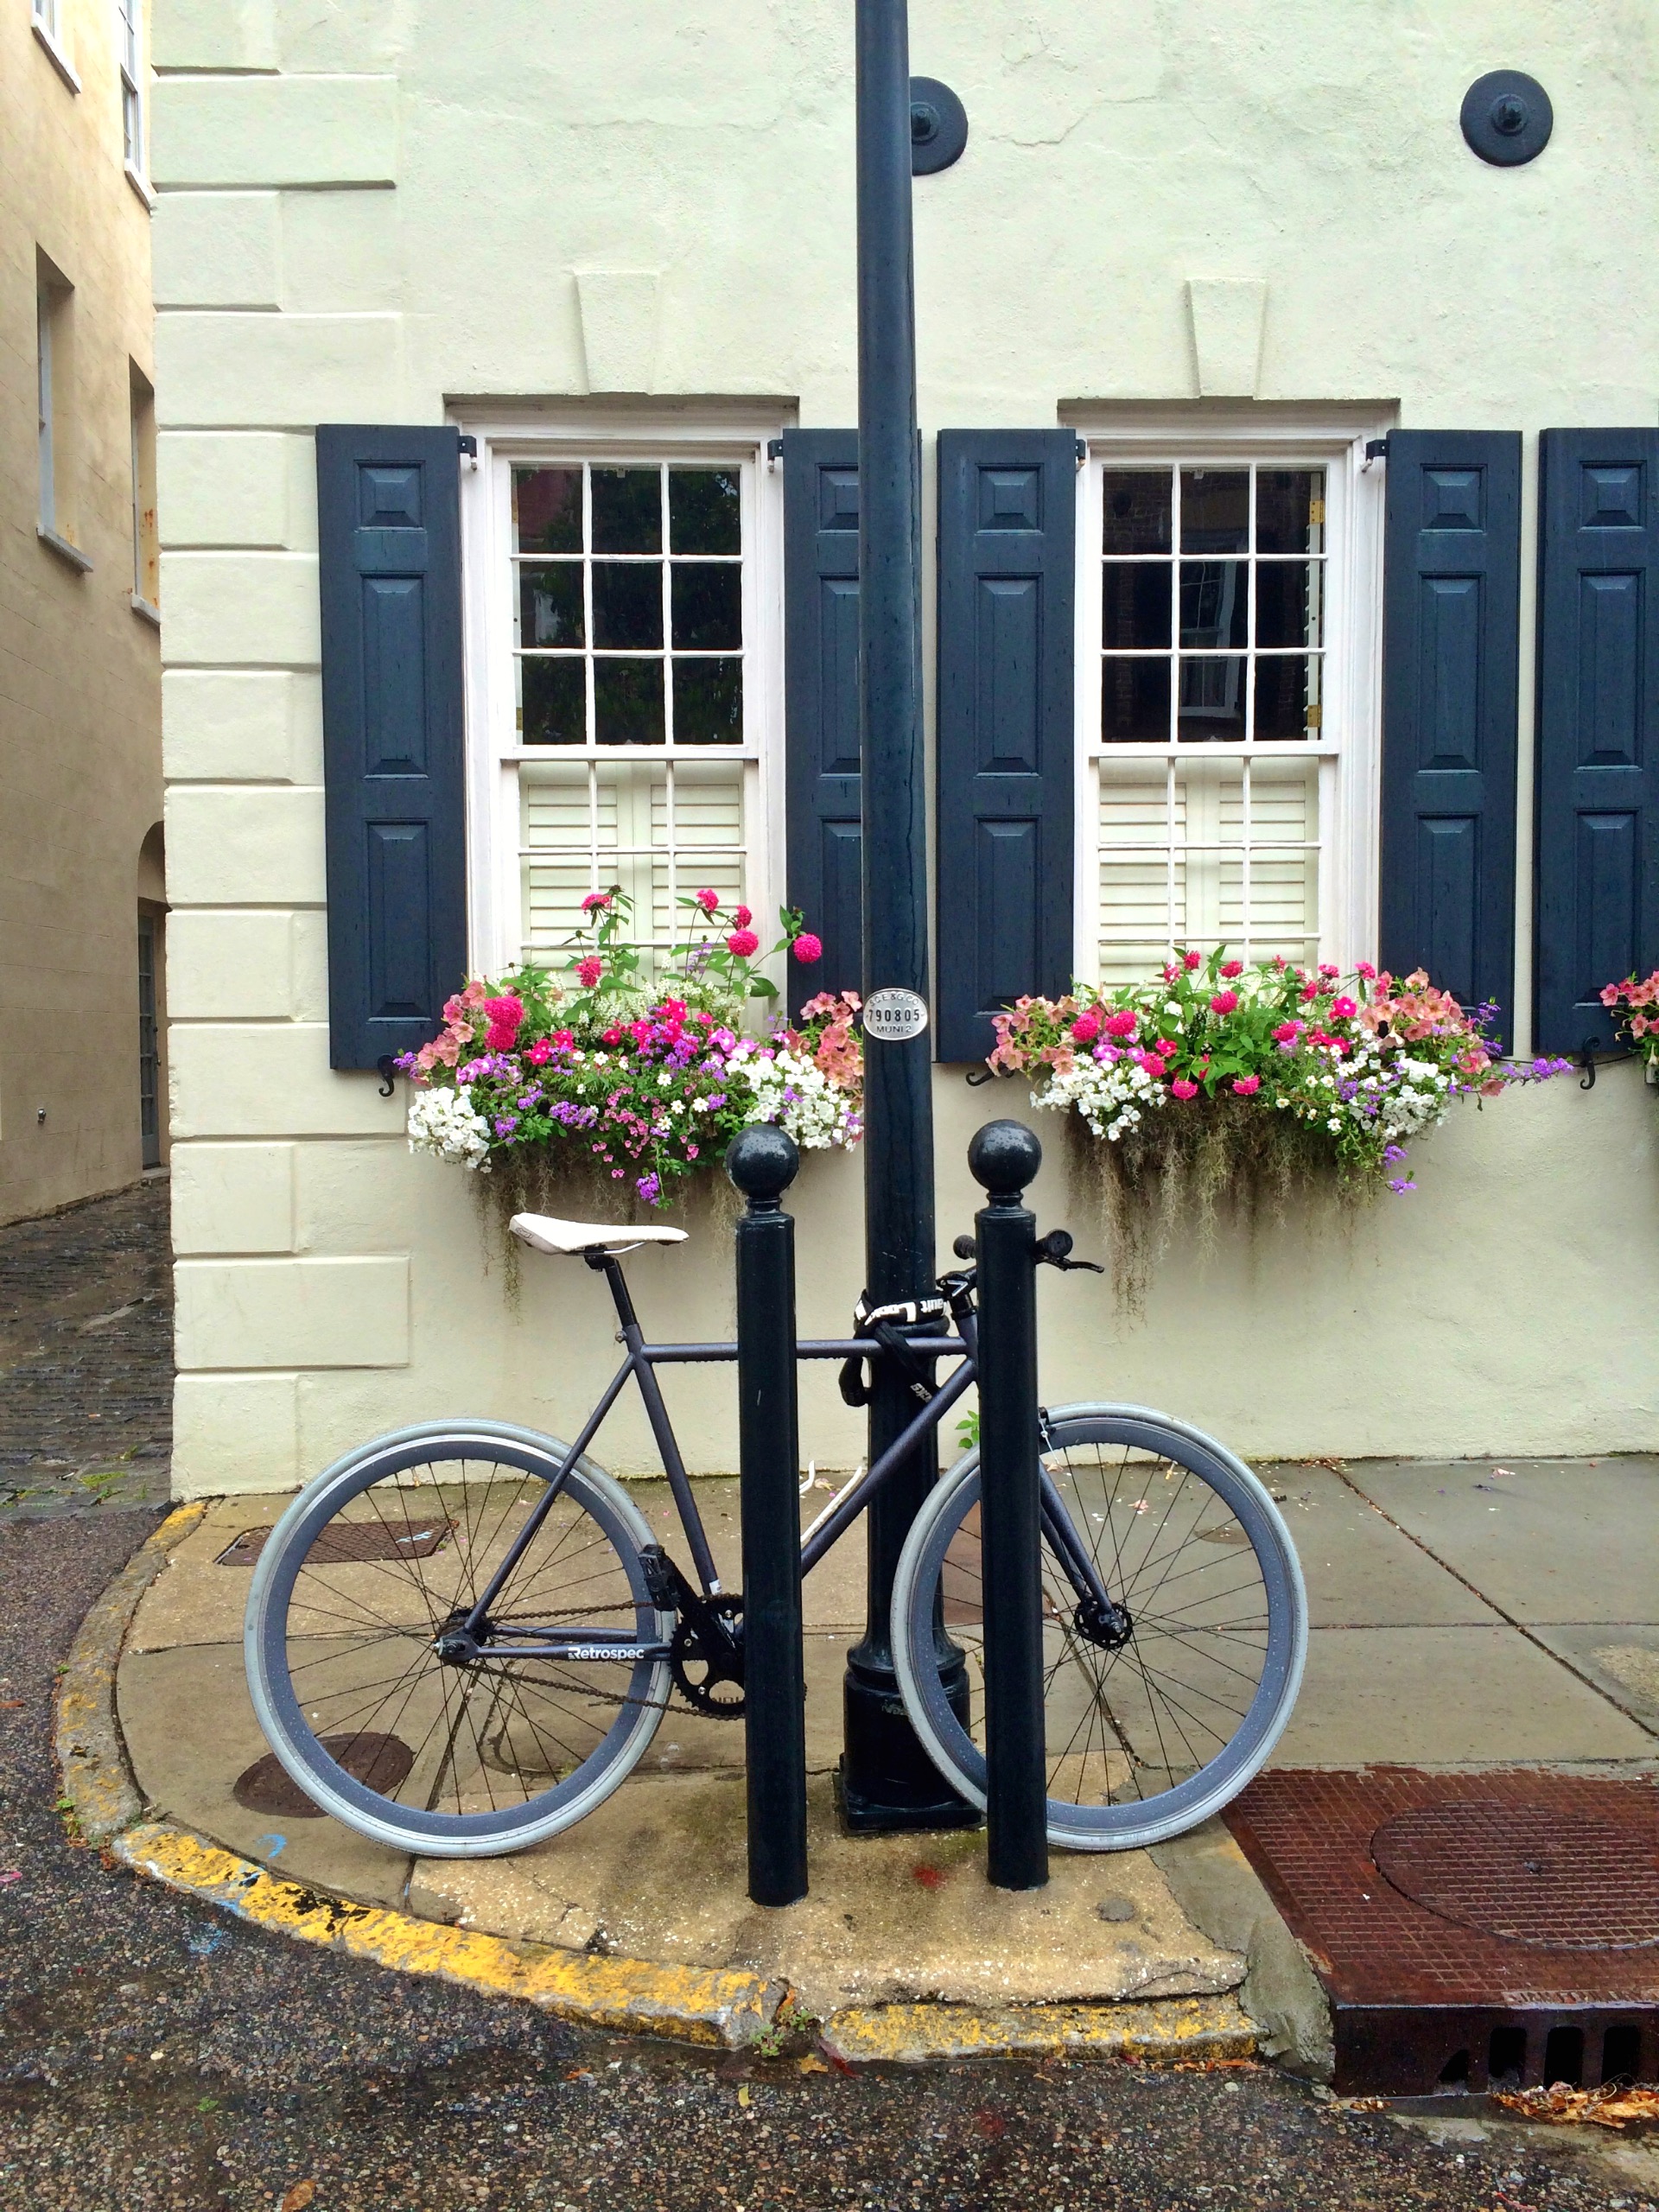 HONORABLE MENTION Professional category: Charleston Charm by Laura Hasemeyer; “Only the most charming city in the world! State Street, Spring 2014”